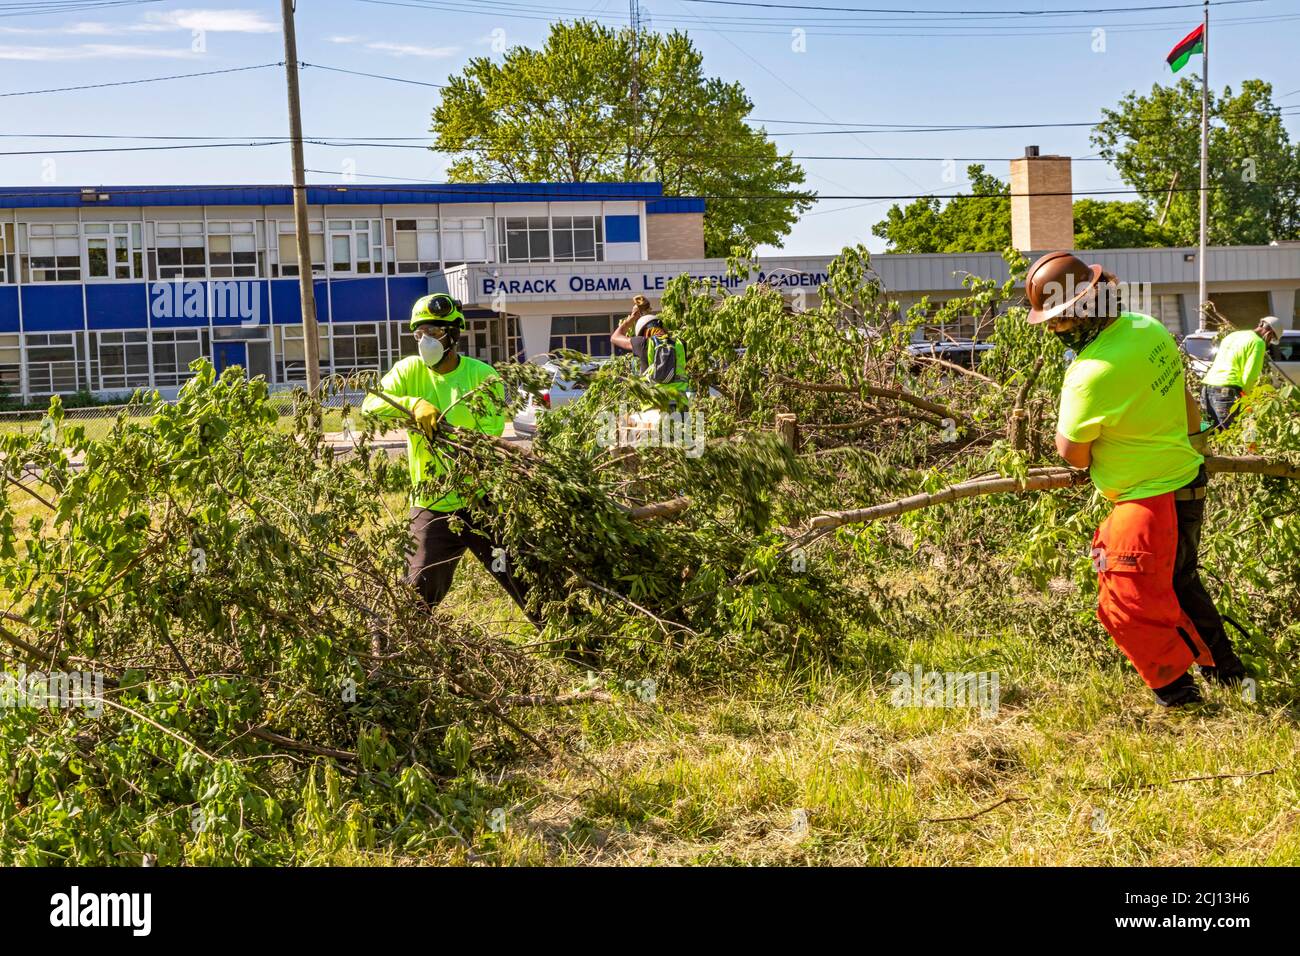 Detroit, Michigan - Workers from the Detroit Grounds Crew clear overgrown brush on a vacant lot next to a school. Stock Photo